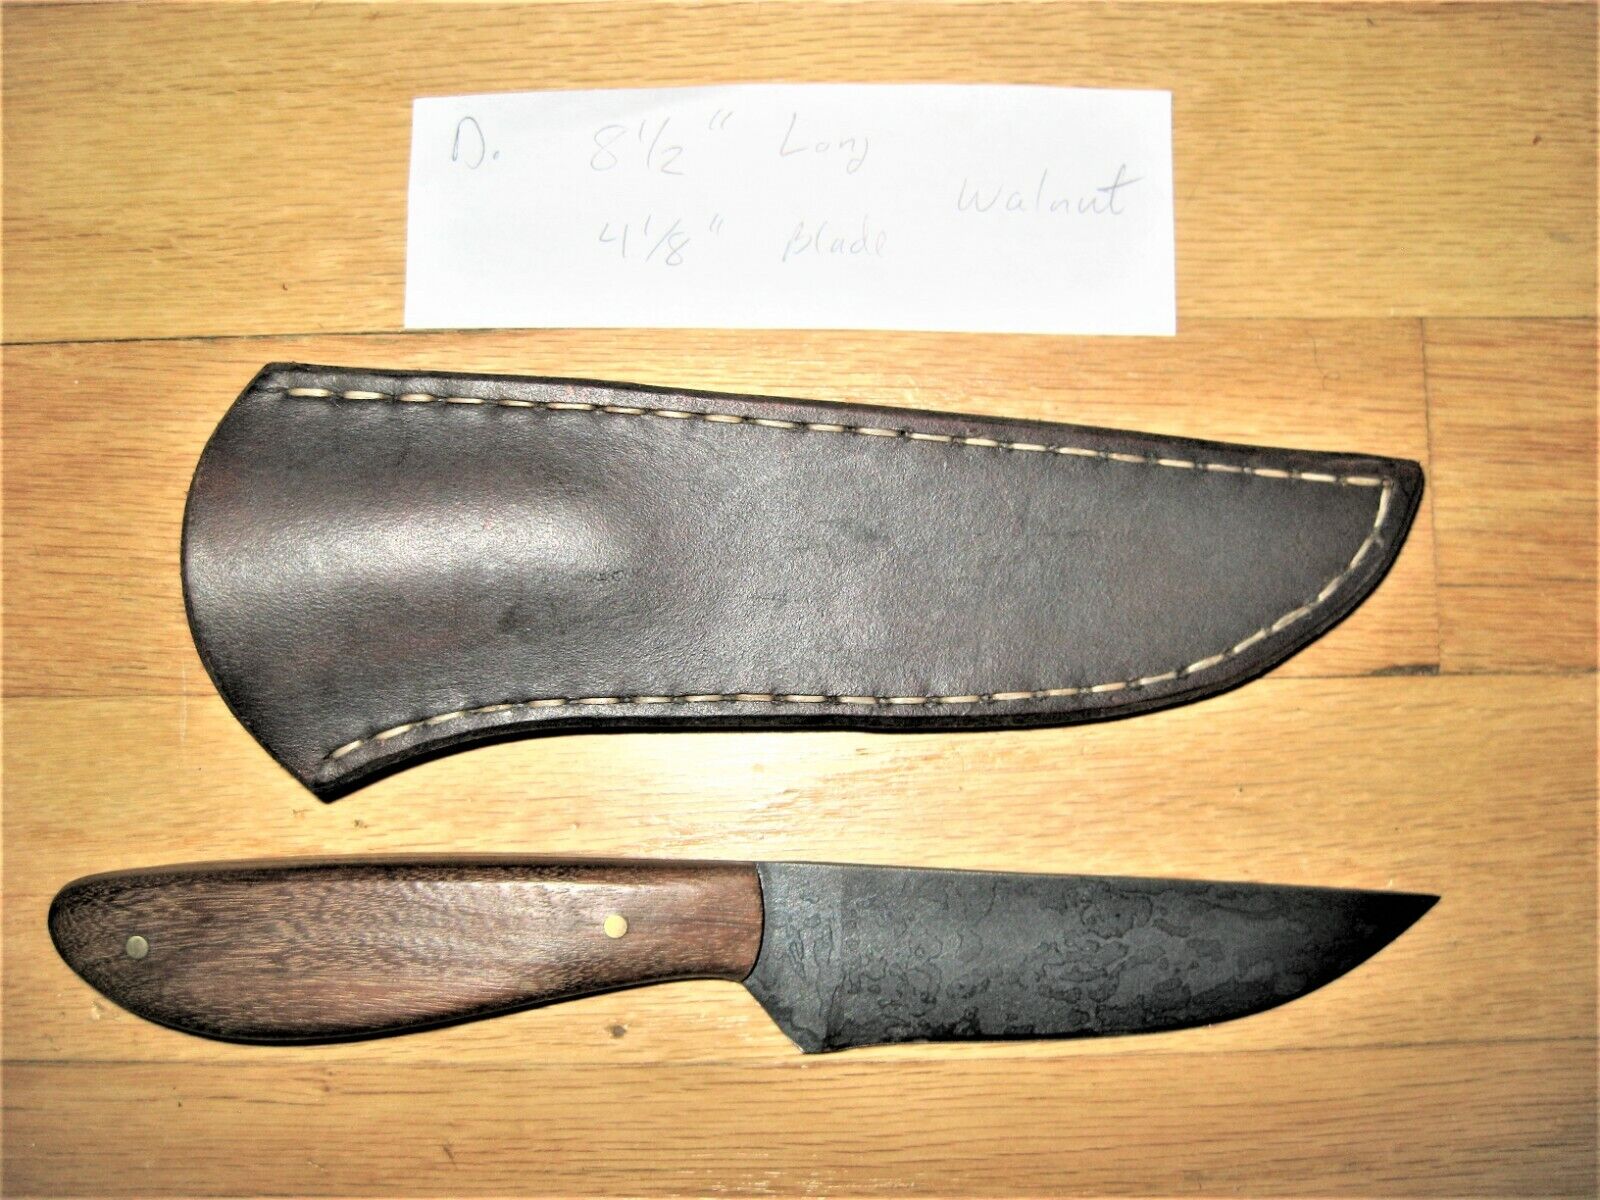 Mountain Man Rendezvous Hand Made Knife and Sheath, Rocking K, Mike Kiley, D